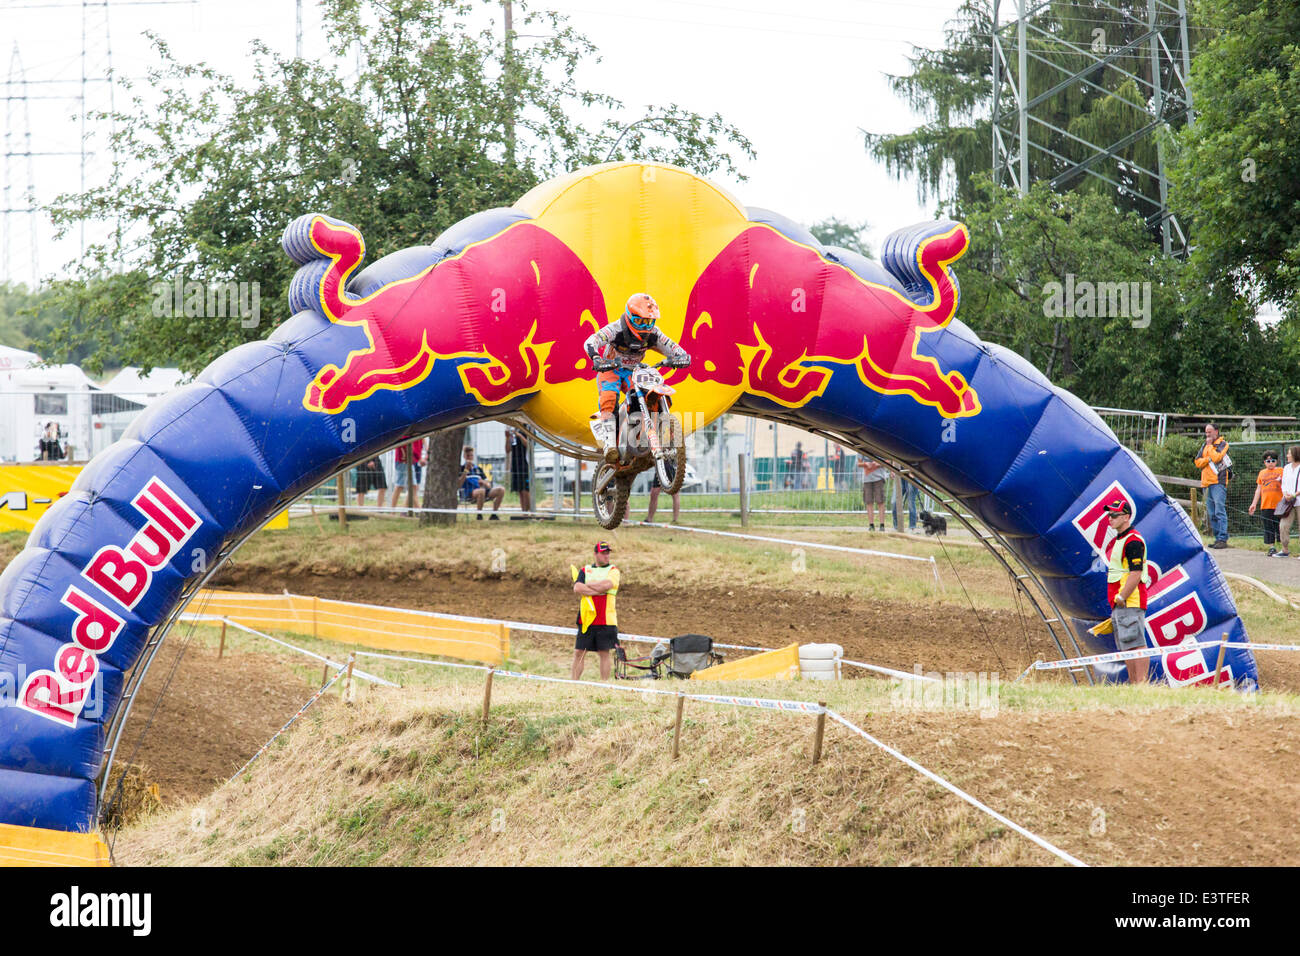 Aichwald, Germany. 27th June, 2014. Motocross ADAC MX Masters 2014 with ' RED BULL' sponsor. Motocross rider are  jumping through the 'Red Bull' arch Credit:  mezzotint alamy/Alamy Live News Stock Photo